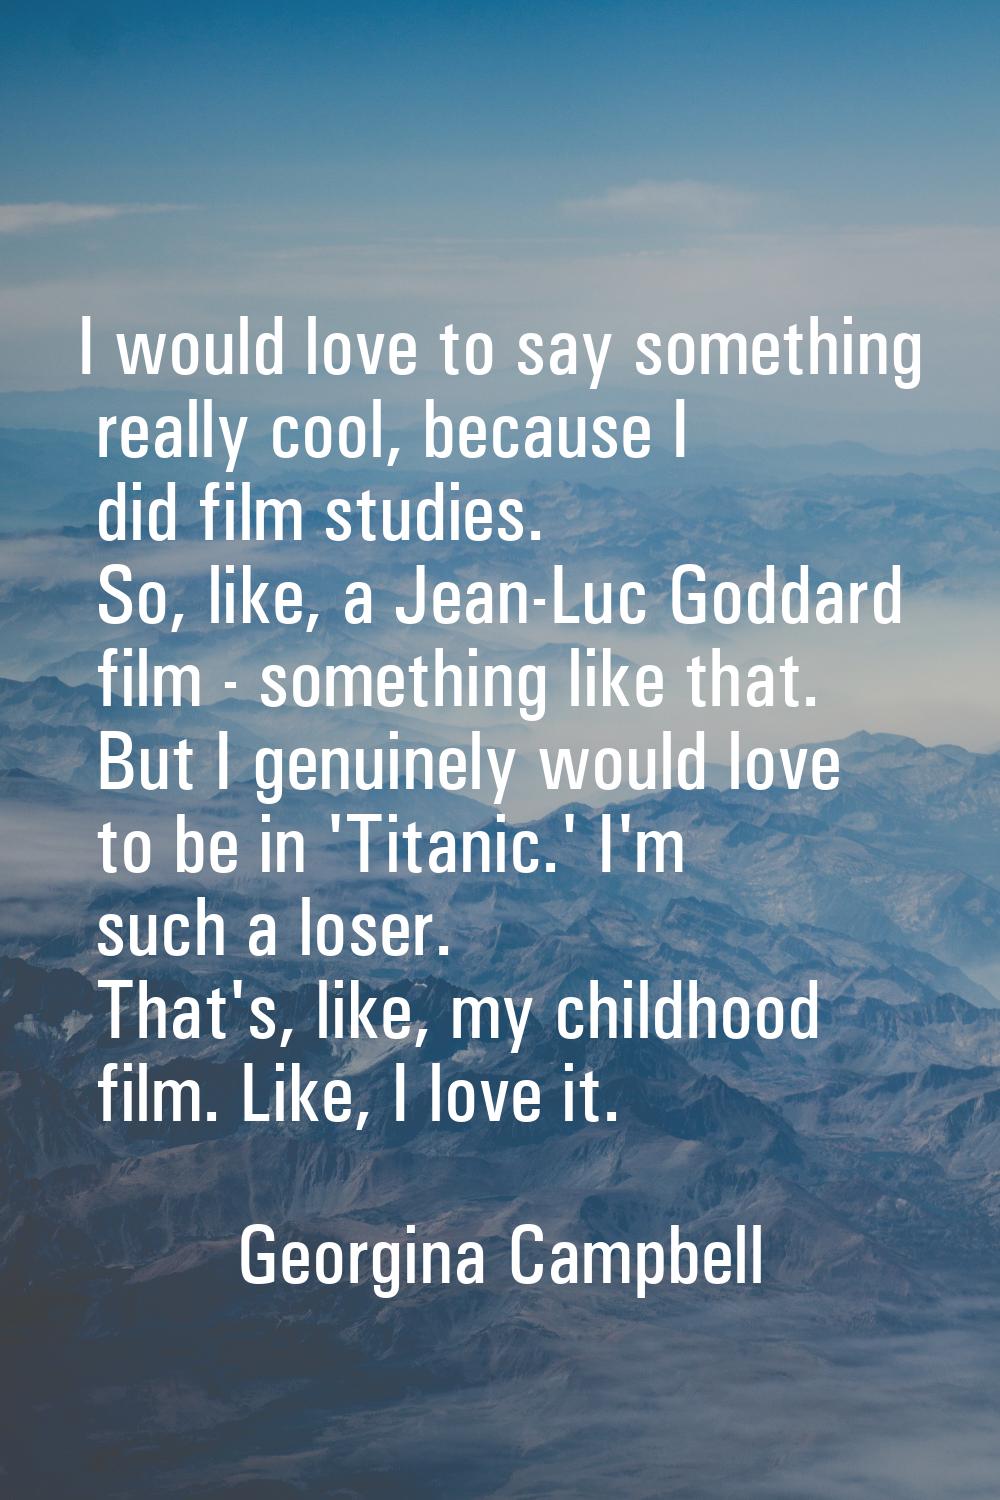 I would love to say something really cool, because I did film studies. So, like, a Jean-Luc Goddard